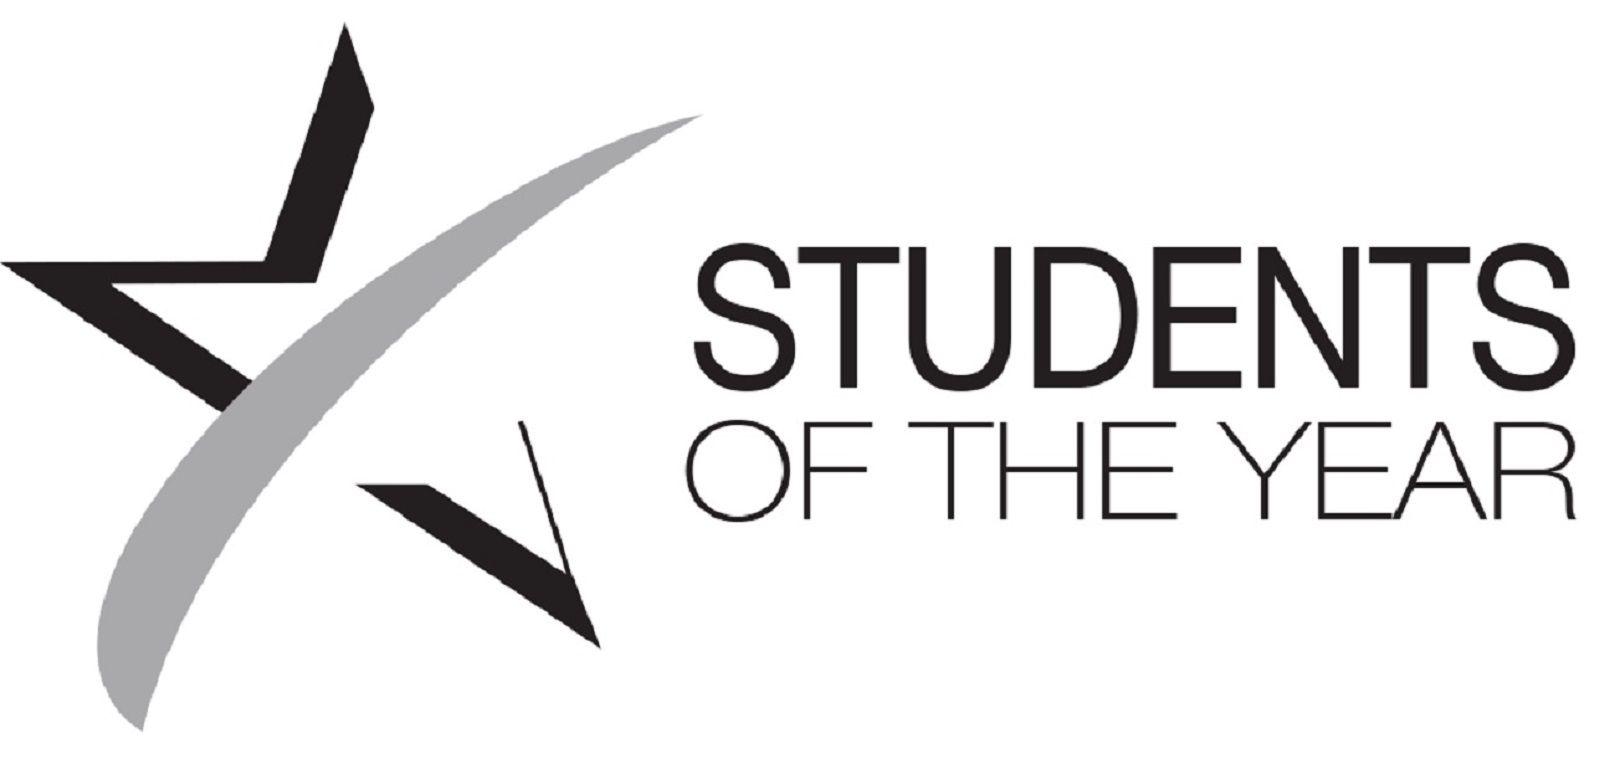 LLS Logo - About Students of The Year | Student Series